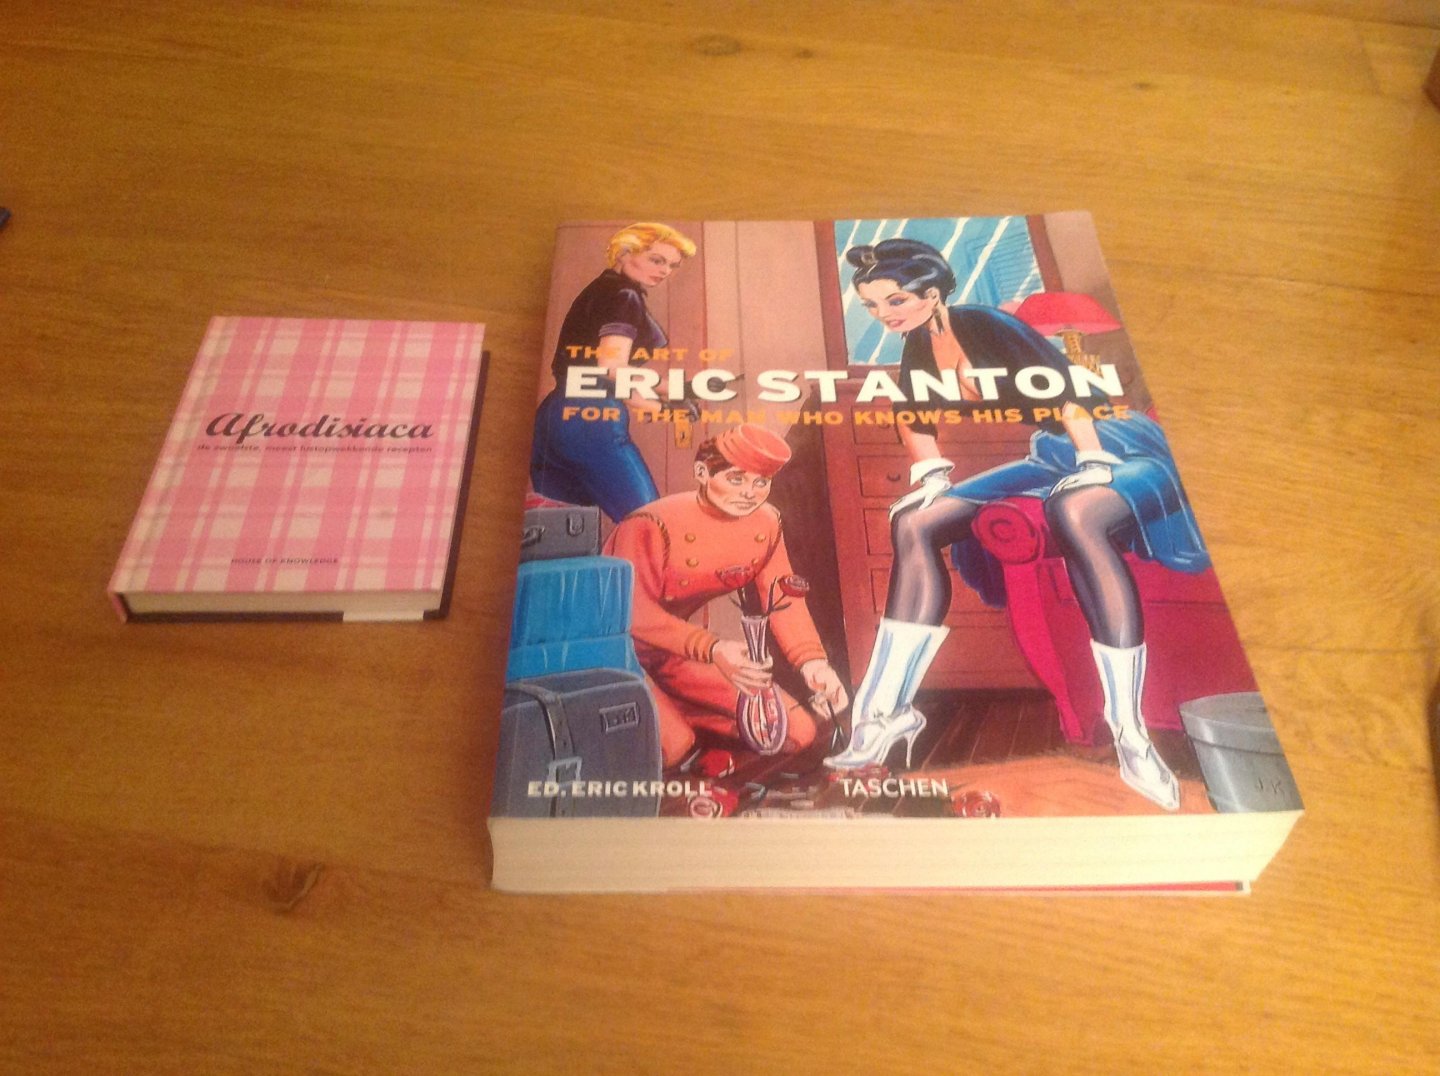  - The Art of Eric Stanton / For the Man Who Knows His Place